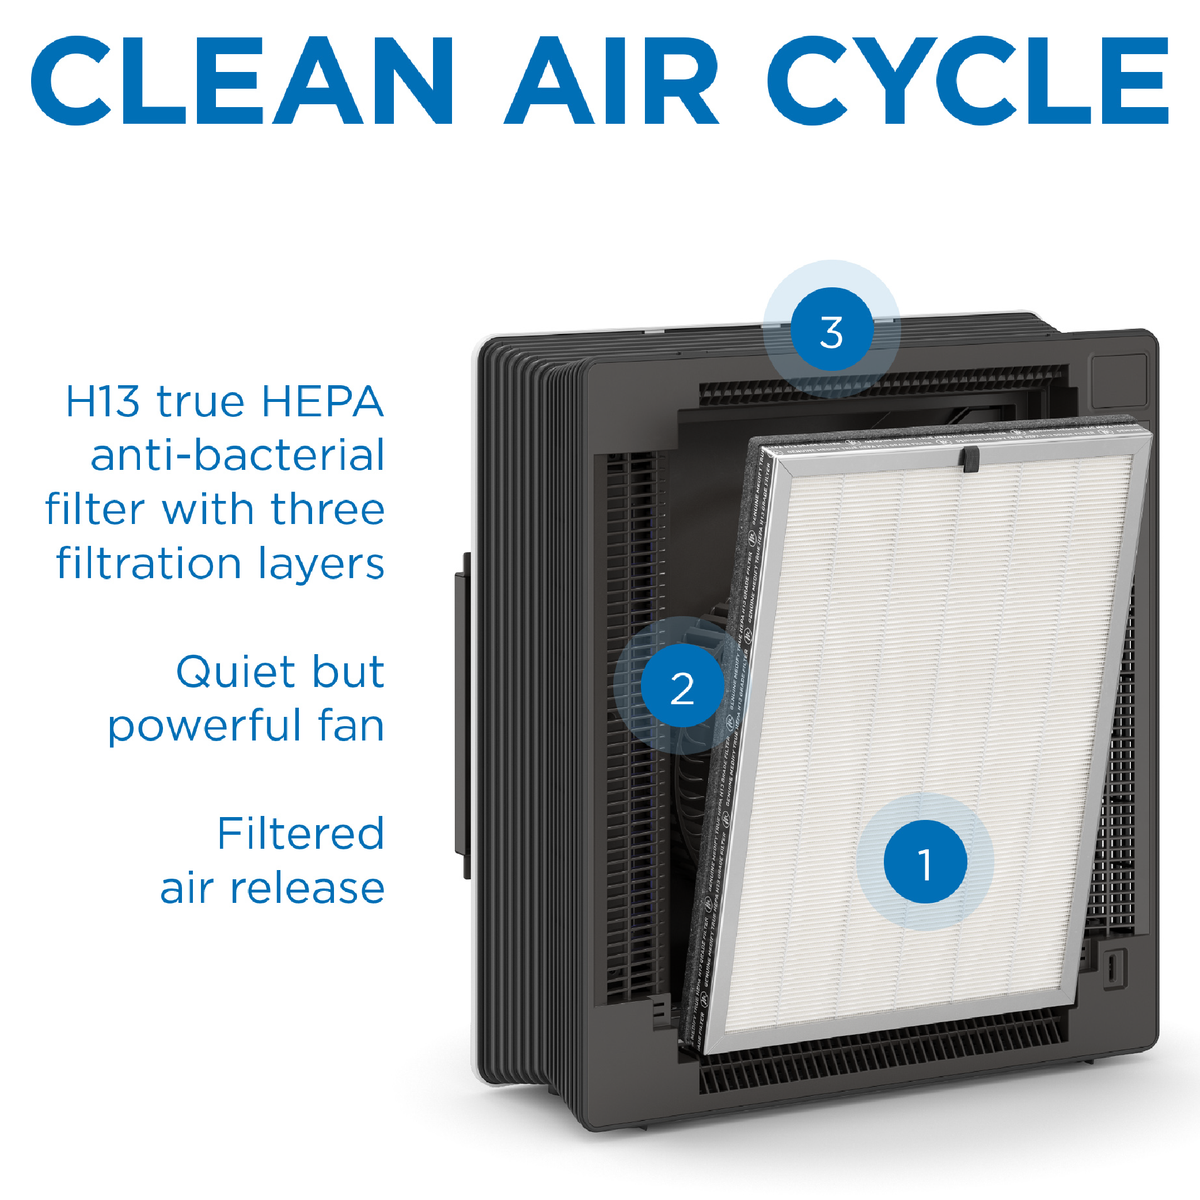 Is this air filter good for removing asbestos from the air? (For peace of  mind after abatement). It's only about a foot tall. Not sure if it is a  true HEPA filter